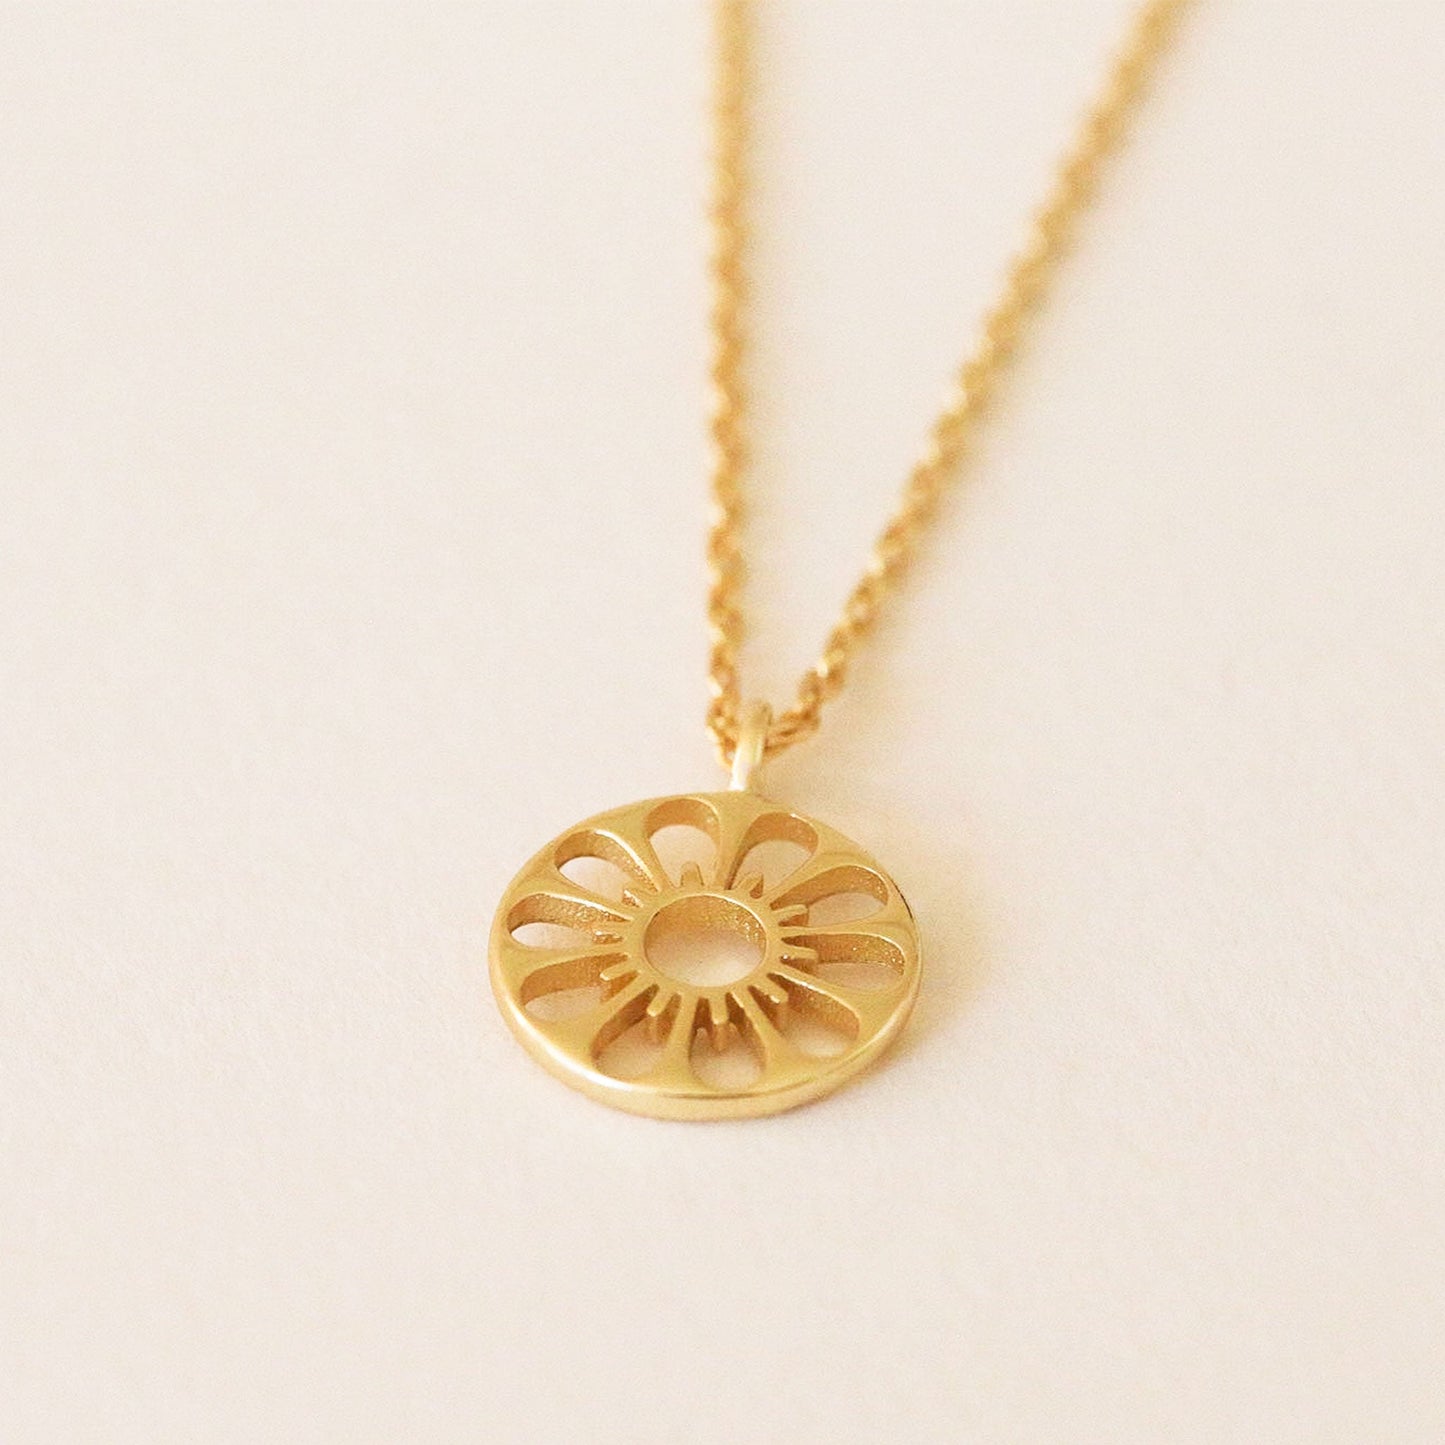 Gold chain necklace complete with circle pendant. The outline of a pleasant daisy is carved out of the pendent.